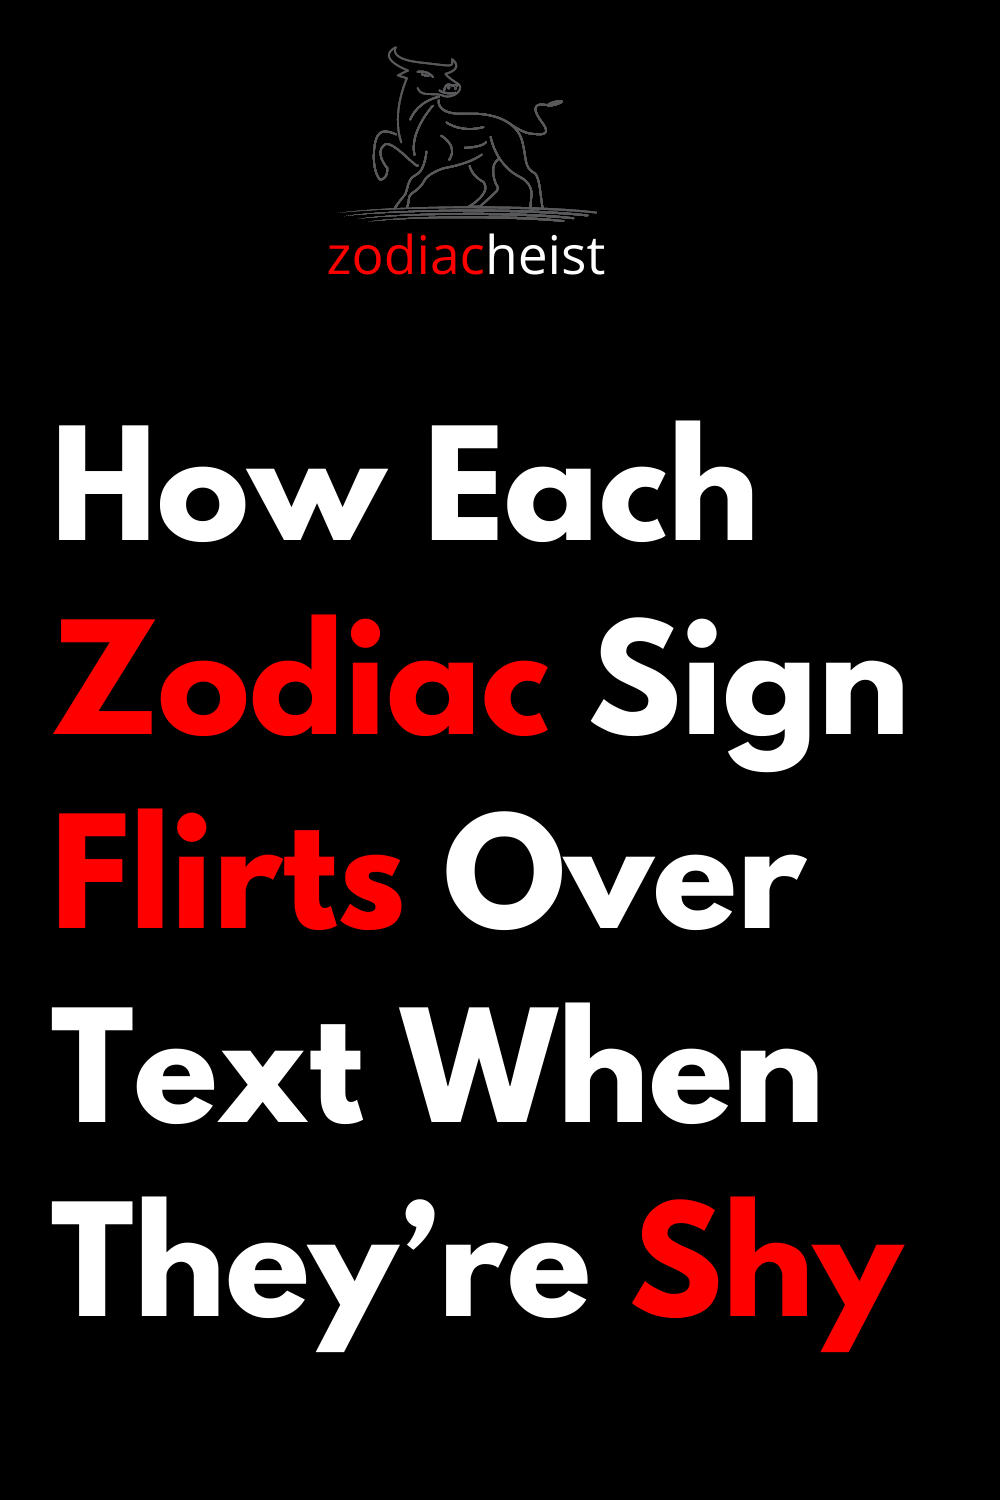 How Each Zodiac Sign Flirts Over Text When They’re Shy